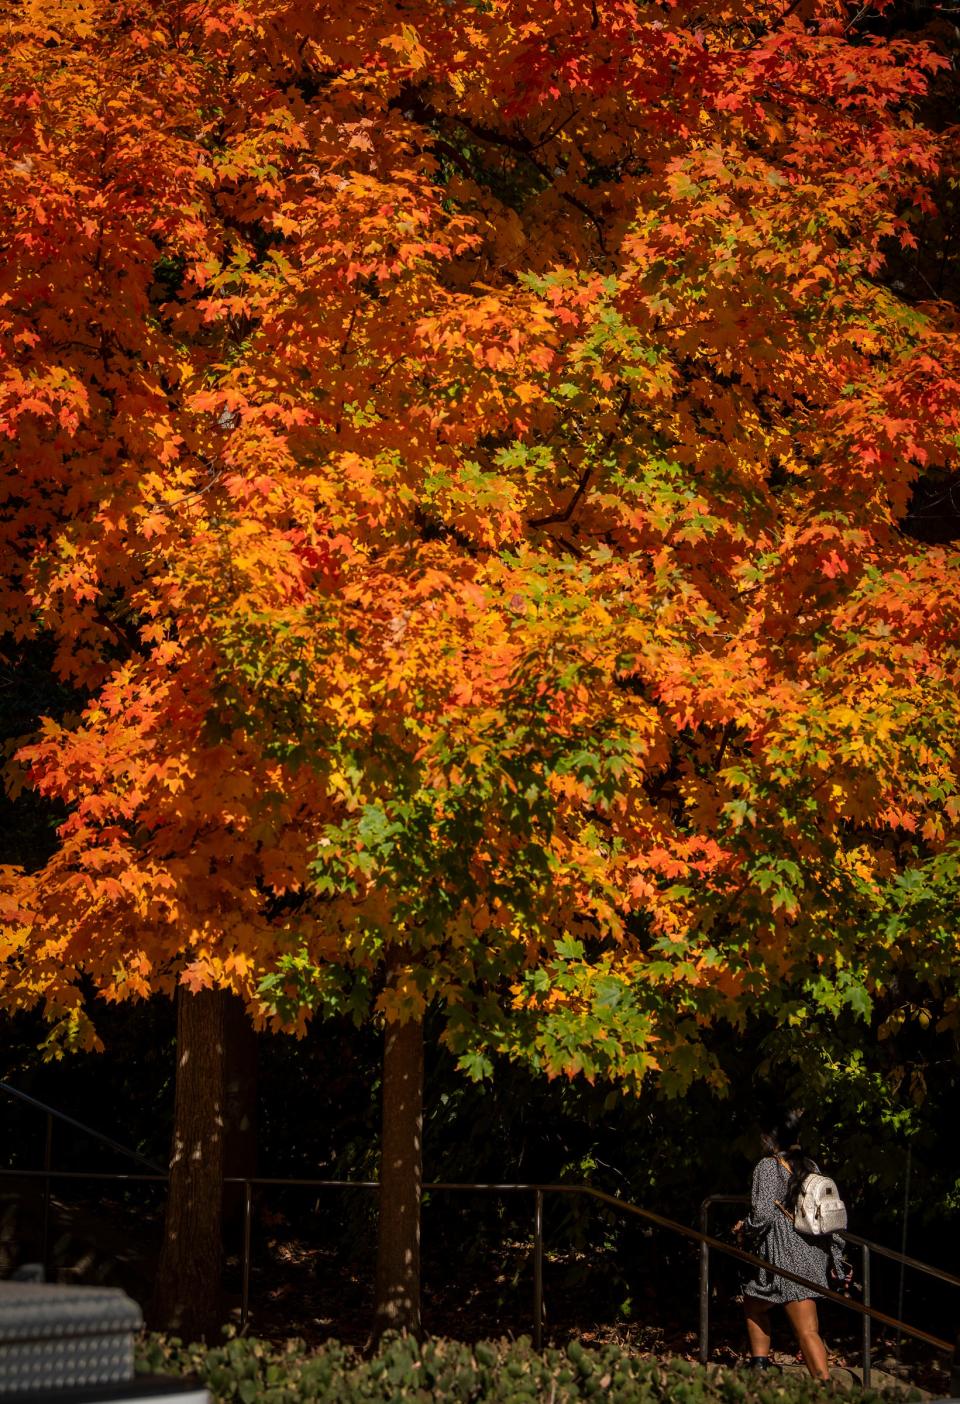 A student heads up a flight of stairs underneath trees showing their fall colors Friday behind Ballantine Hall on Indiana University’s campus. While autumn’s splendor can be seen across south-central Indiana right now, Brown County State Park is asking people to vote for the day when the park reaches its peak colors. (Rich Janzaruk / Herald-Times)